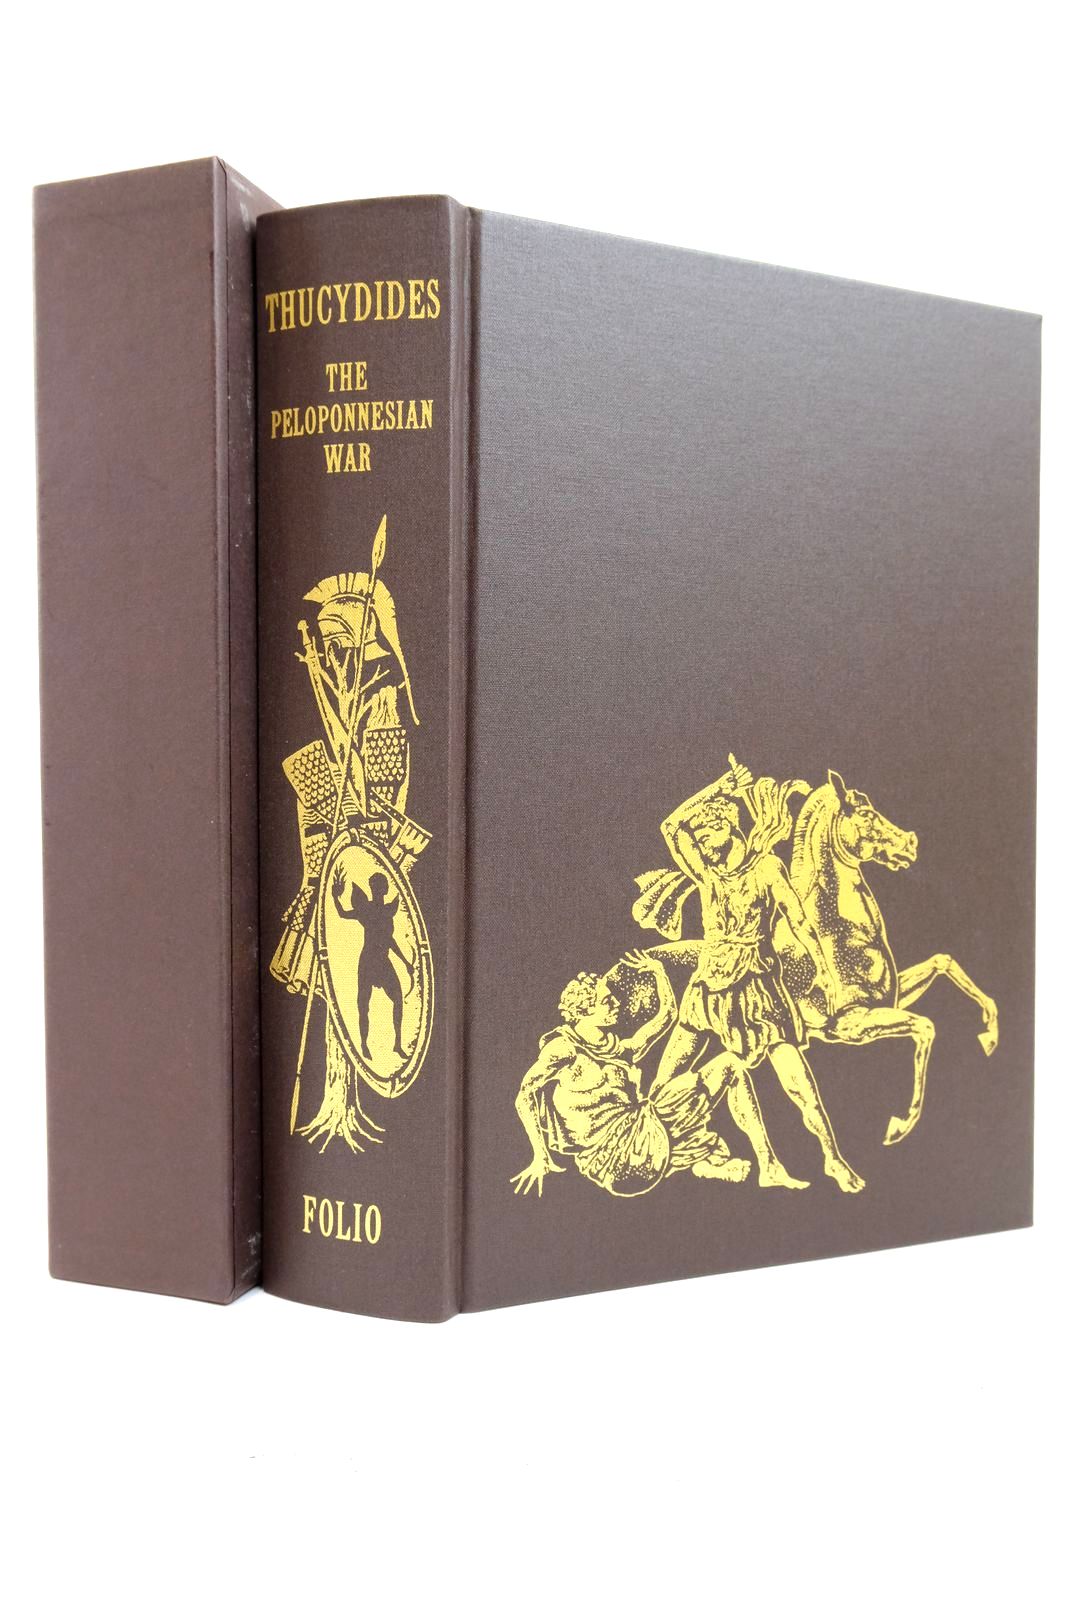 Photo of THUCYDIDES: THE HISTORY OF THE PELOPONNESIAN WAR written by Warner, Rex Finley, M.I. Rabb, Theodore K. published by Folio Society (STOCK CODE: 2140933)  for sale by Stella & Rose's Books